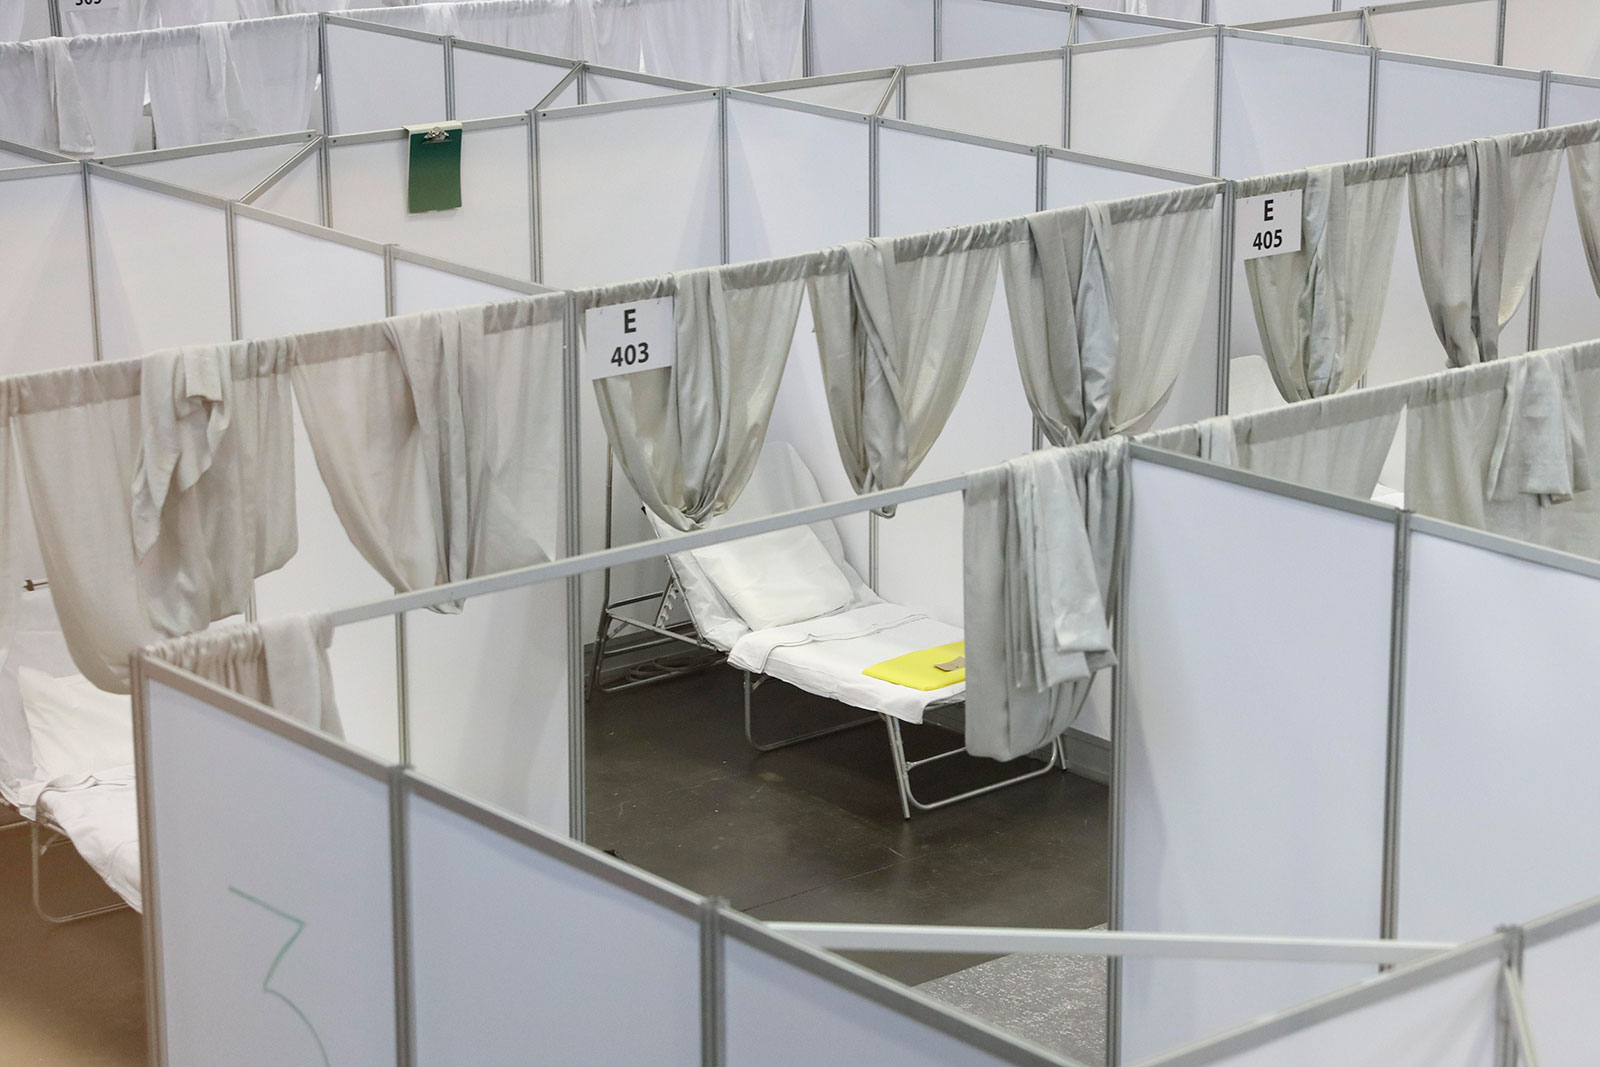 Temporary hospital rooms are set up inside the Javits Center in New York.